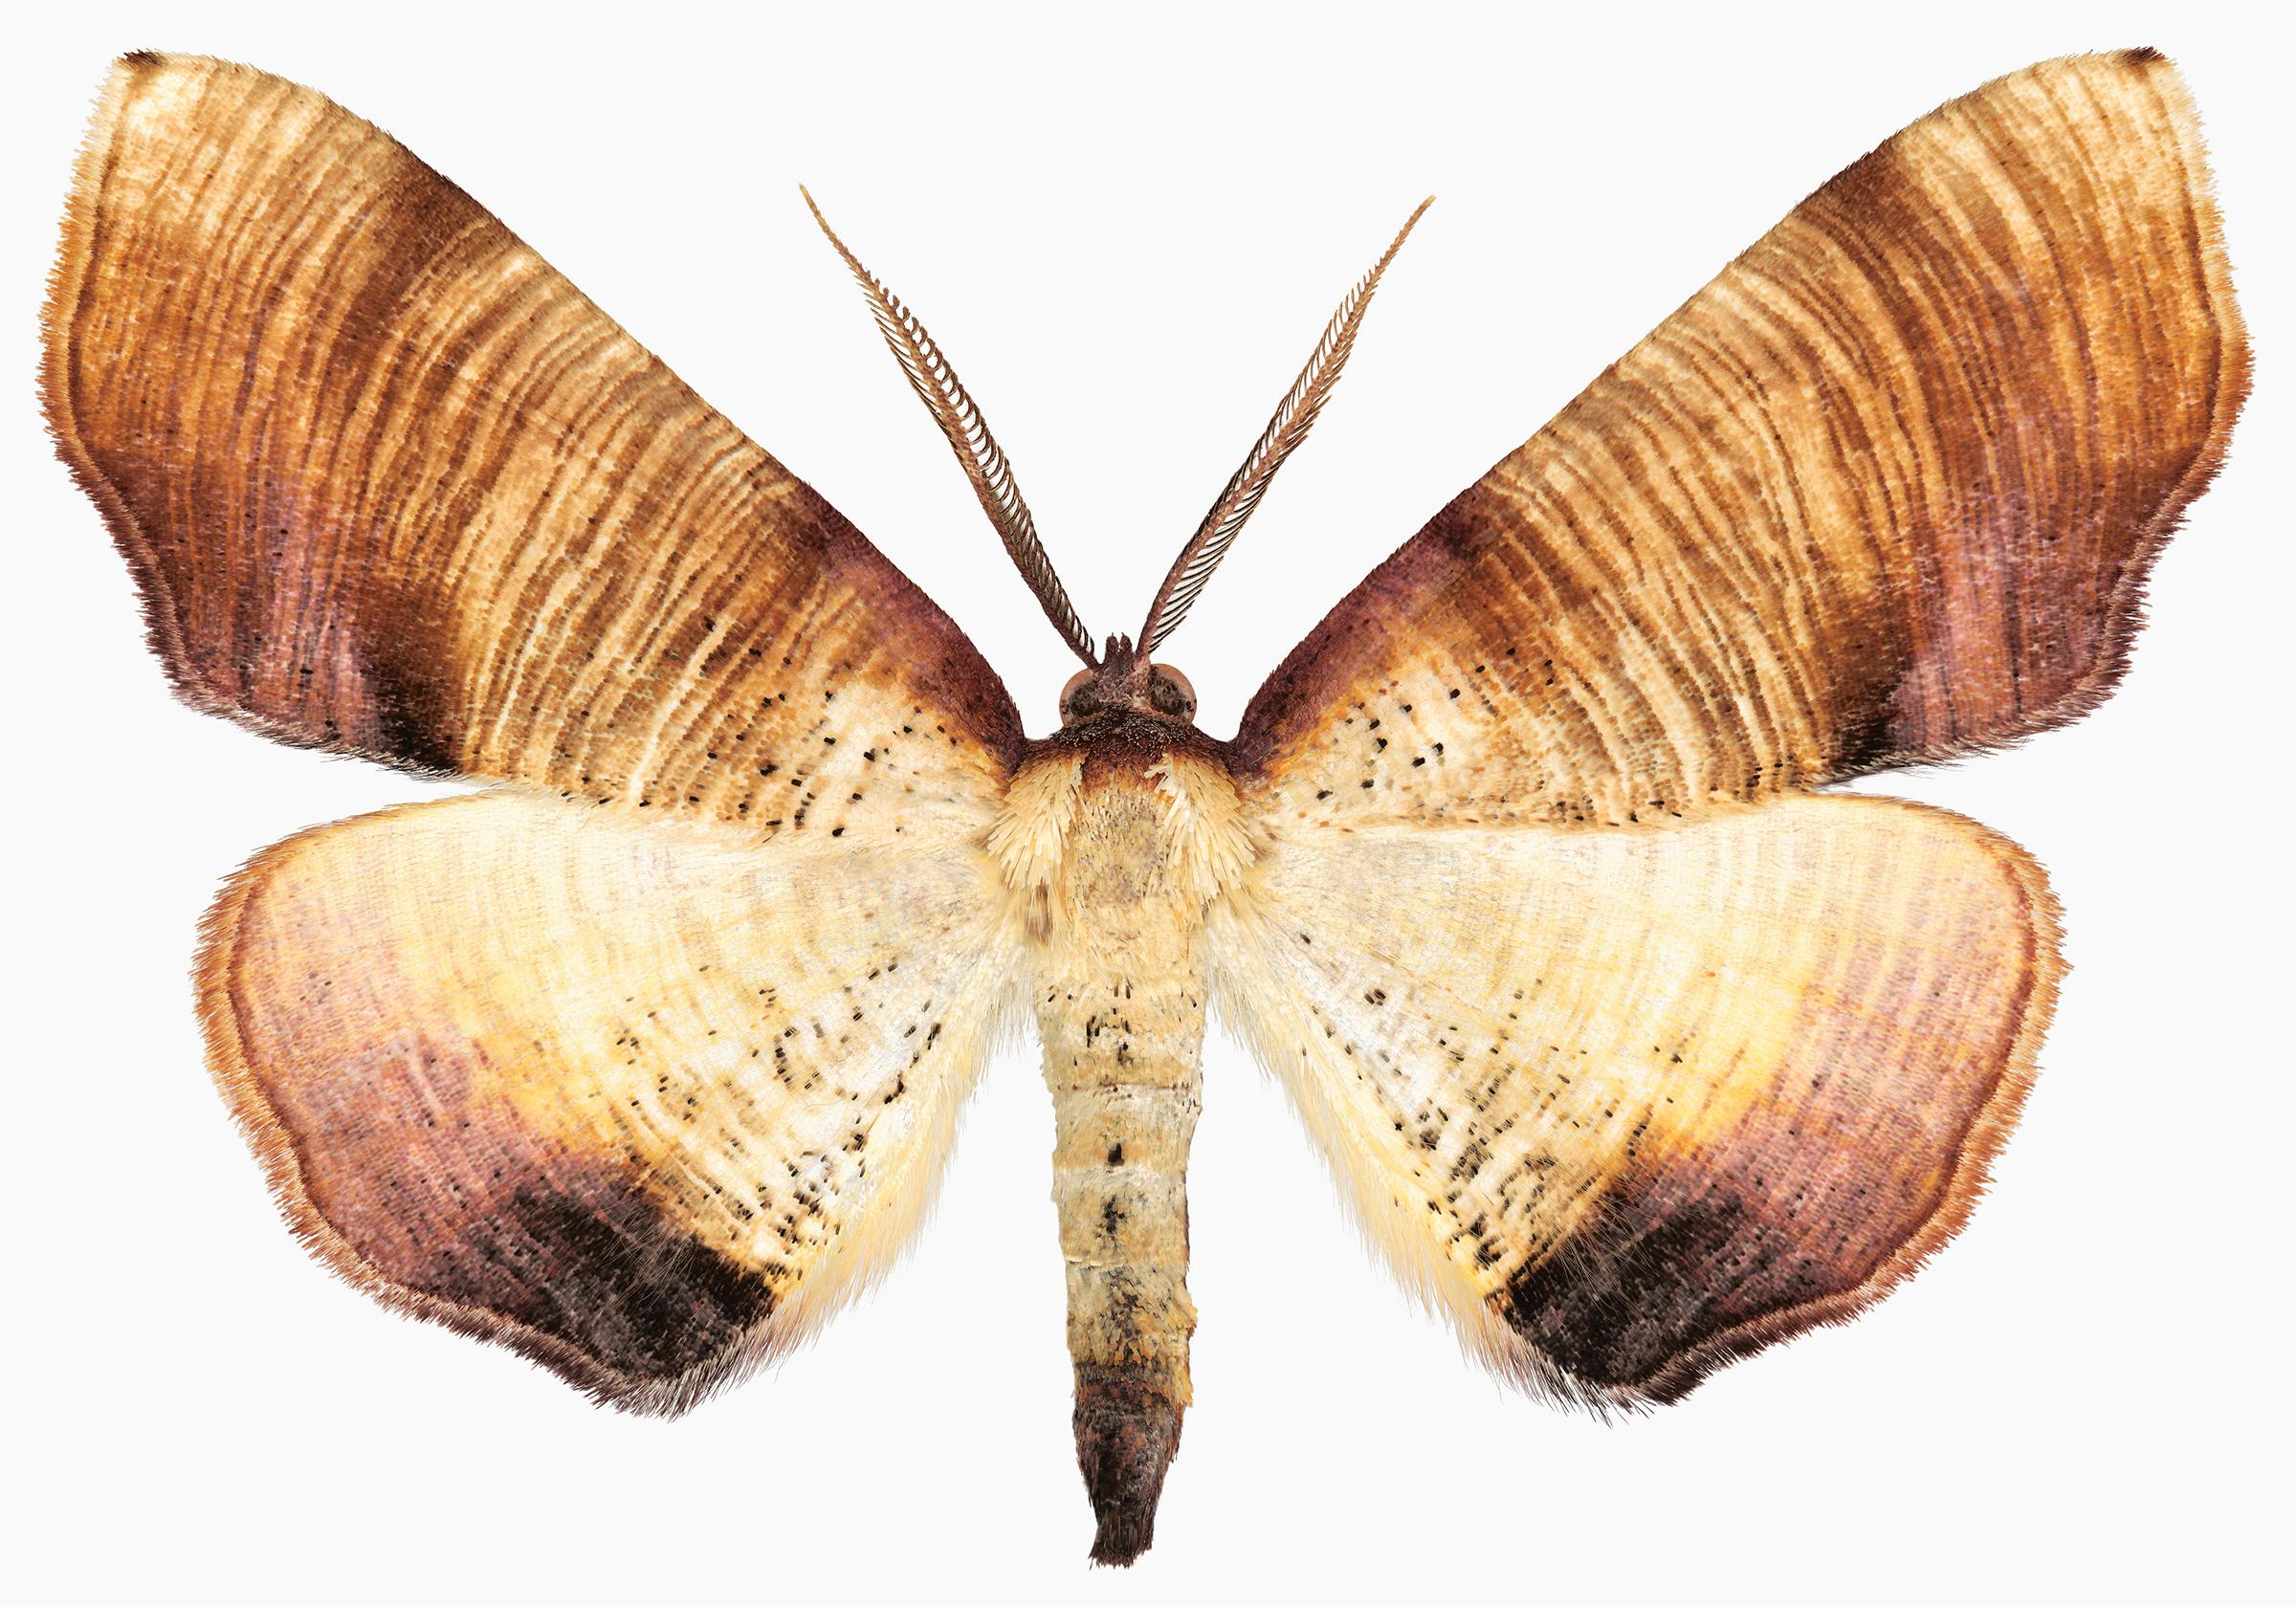 Joseph Scheer Color Photograph - Plagodis Dolabraria, Brown, Beige, Cream Moth on White, Nature Insect Photograph